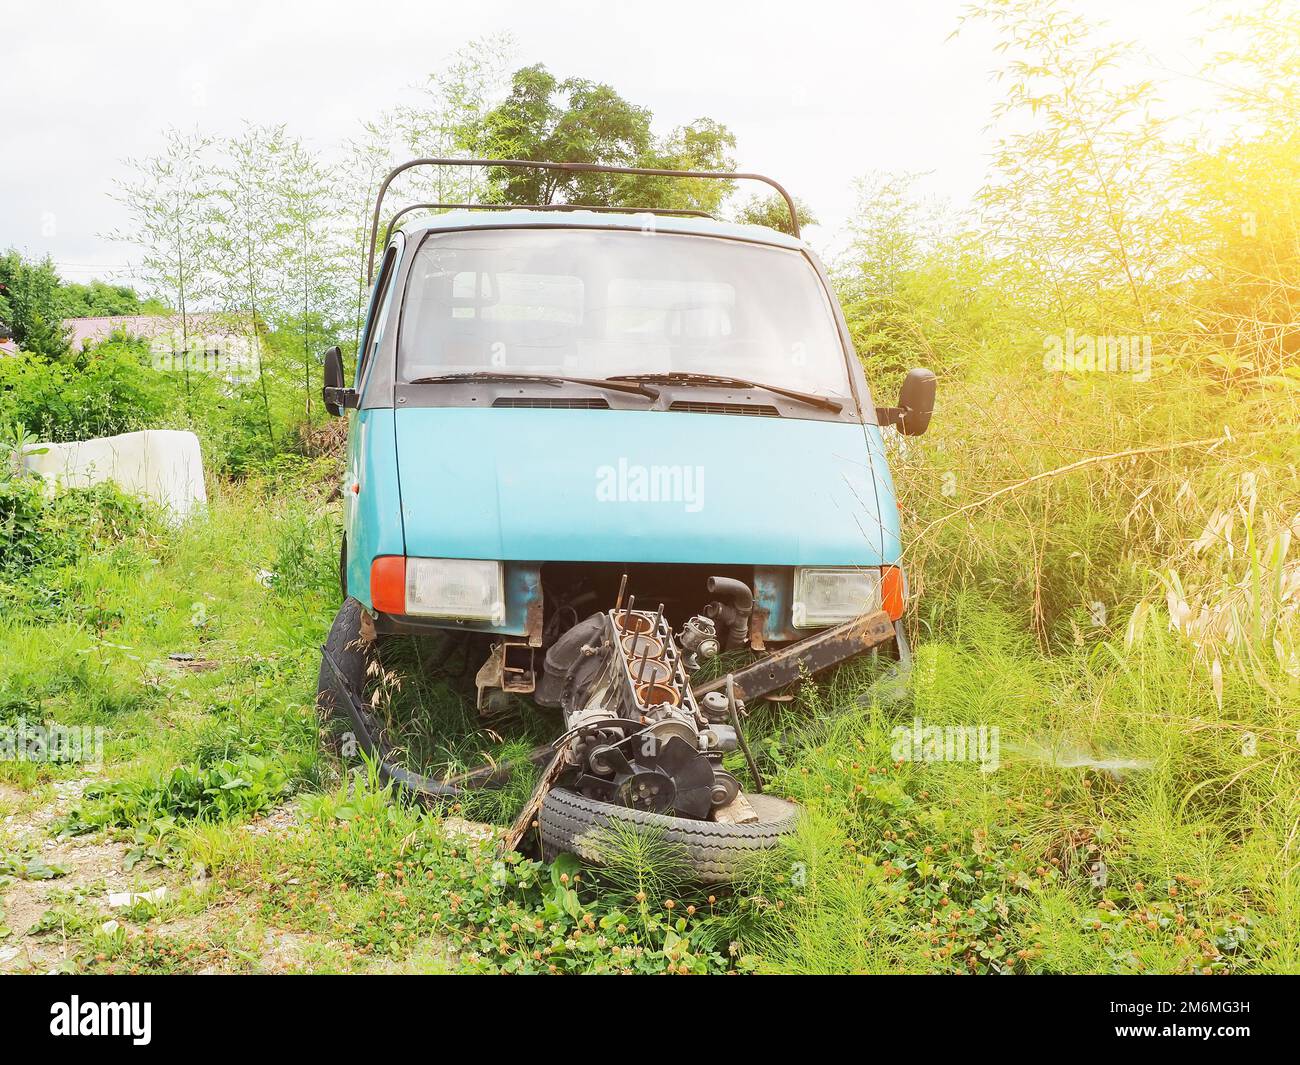 Truck engine broken. Abandoned obsolete car in the countryside. Car dismantled for parts. Engine replacement. Stock Photo